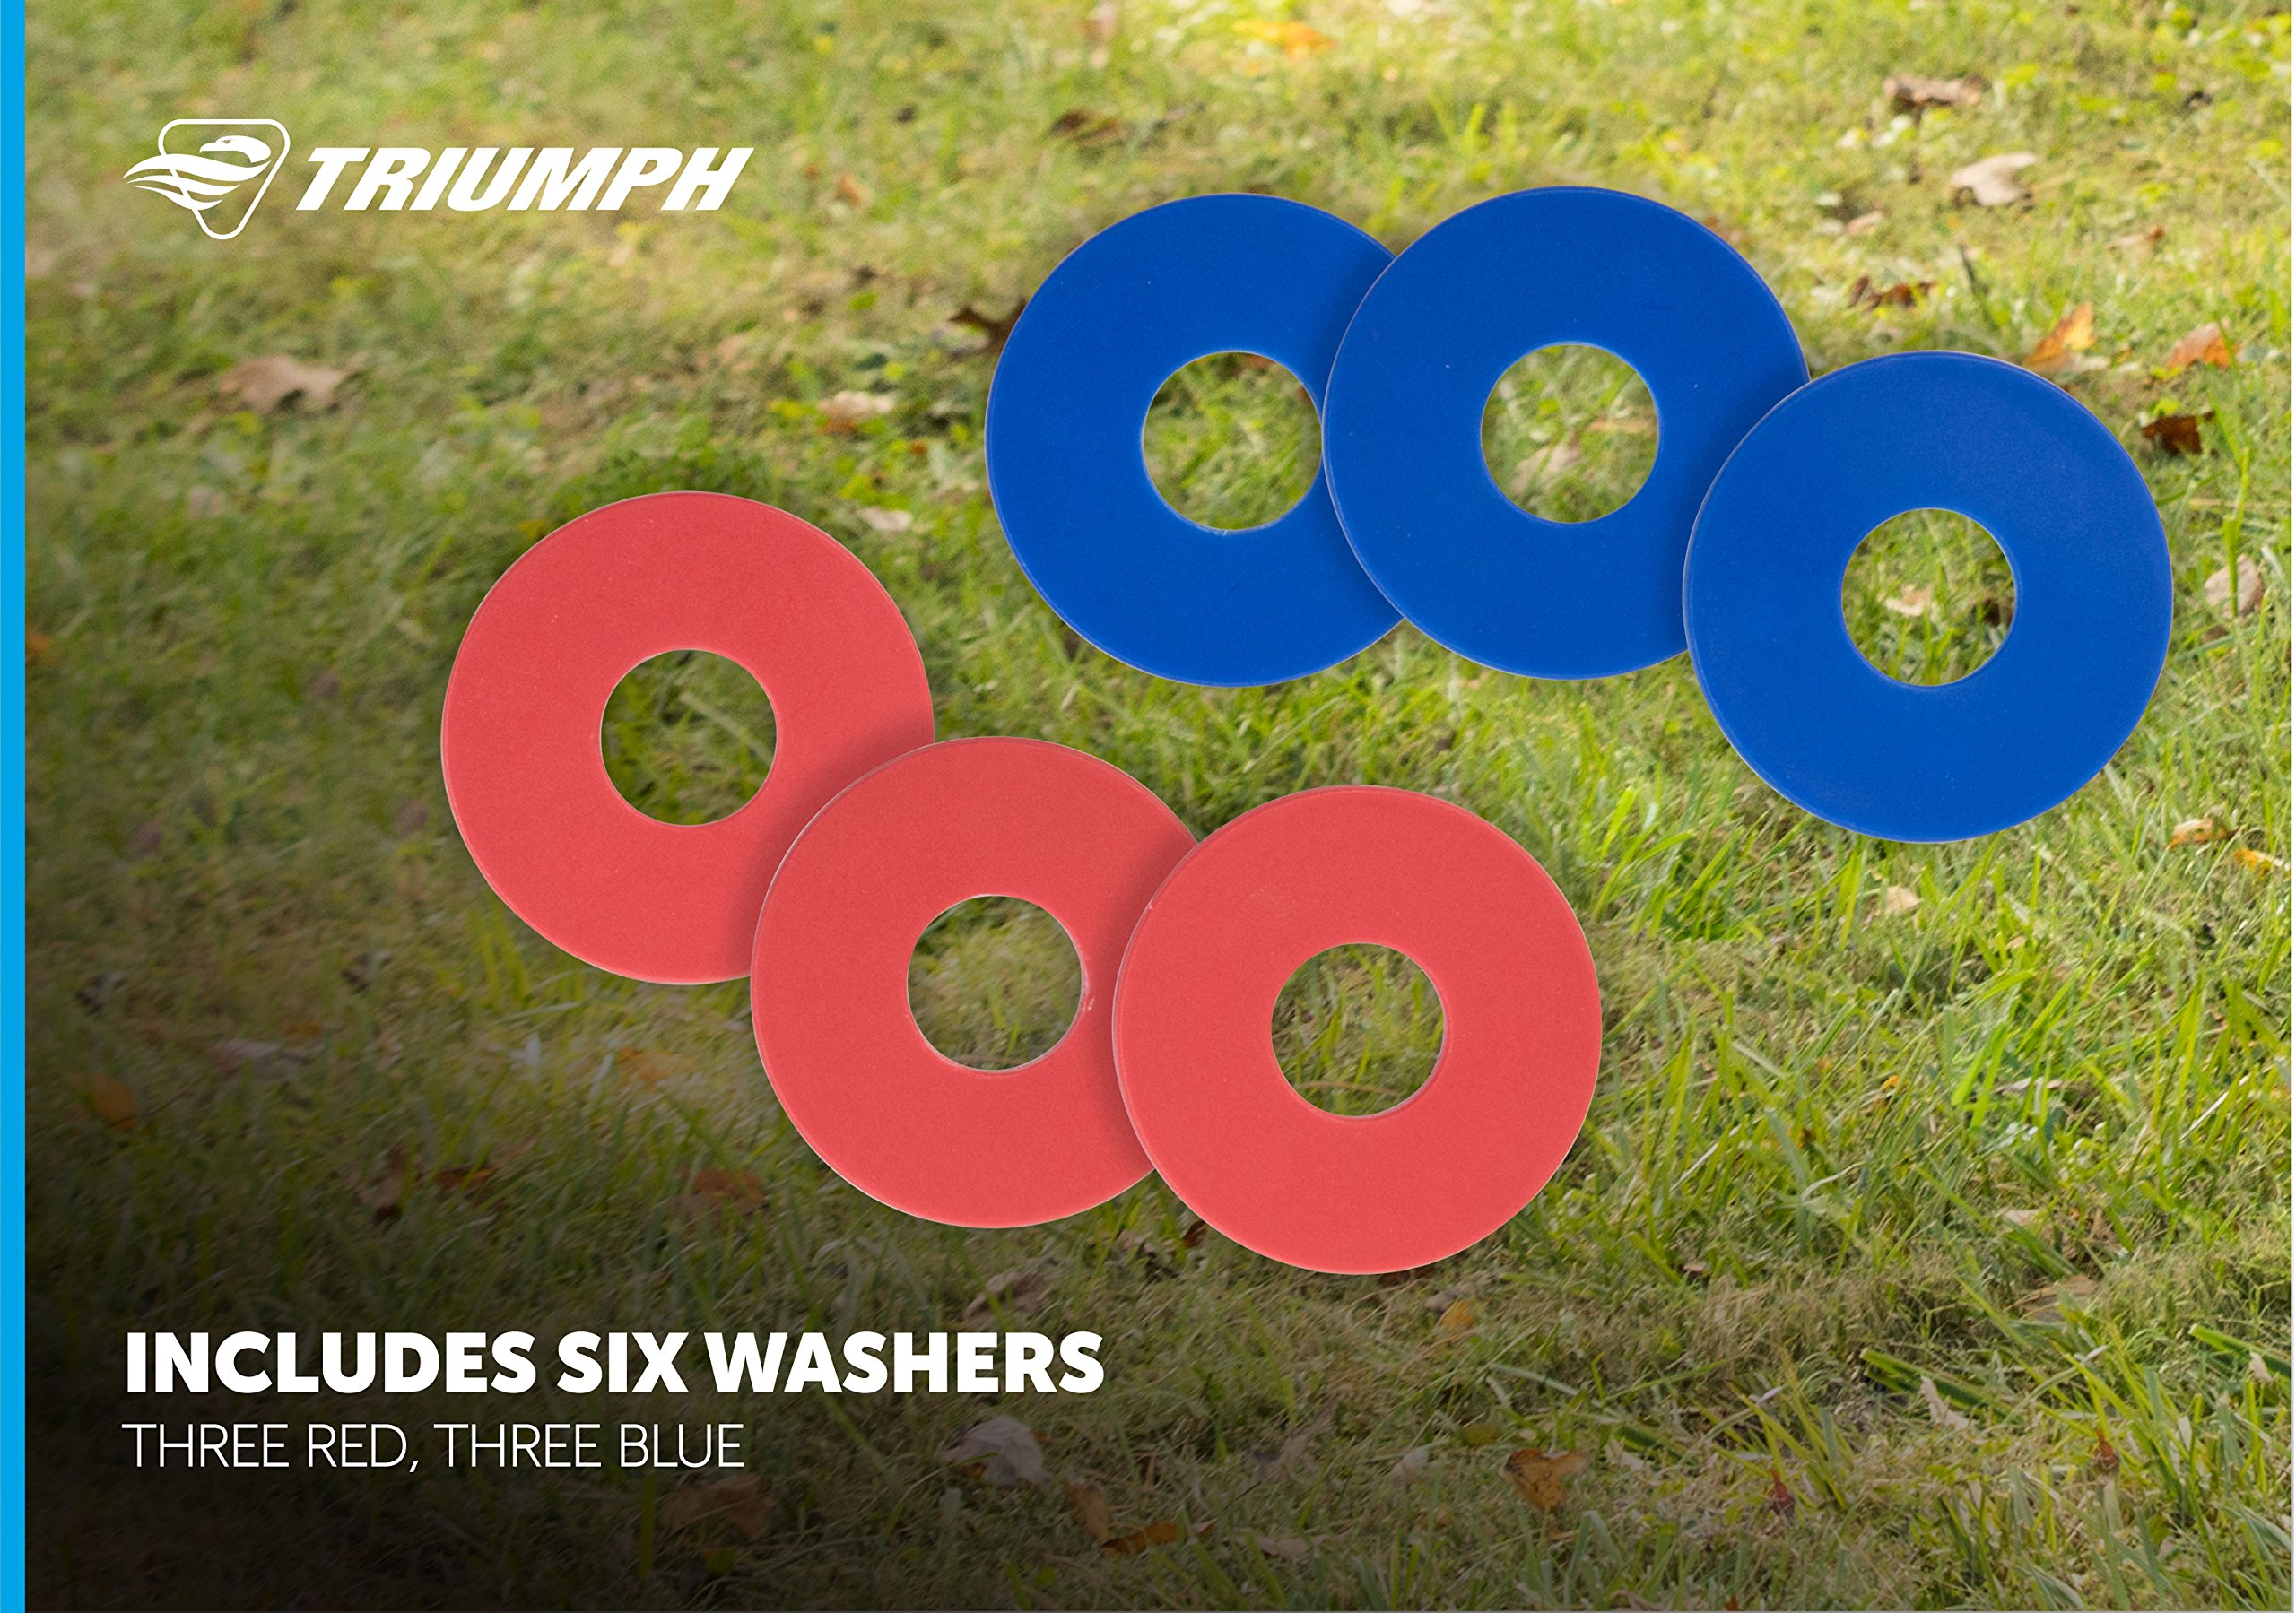 Triumph Sports 2-in-1 Bag Toss/ Washer Toss Combo - Includes 2 Game Platforms, 6 Toss Bags, 6 Washers